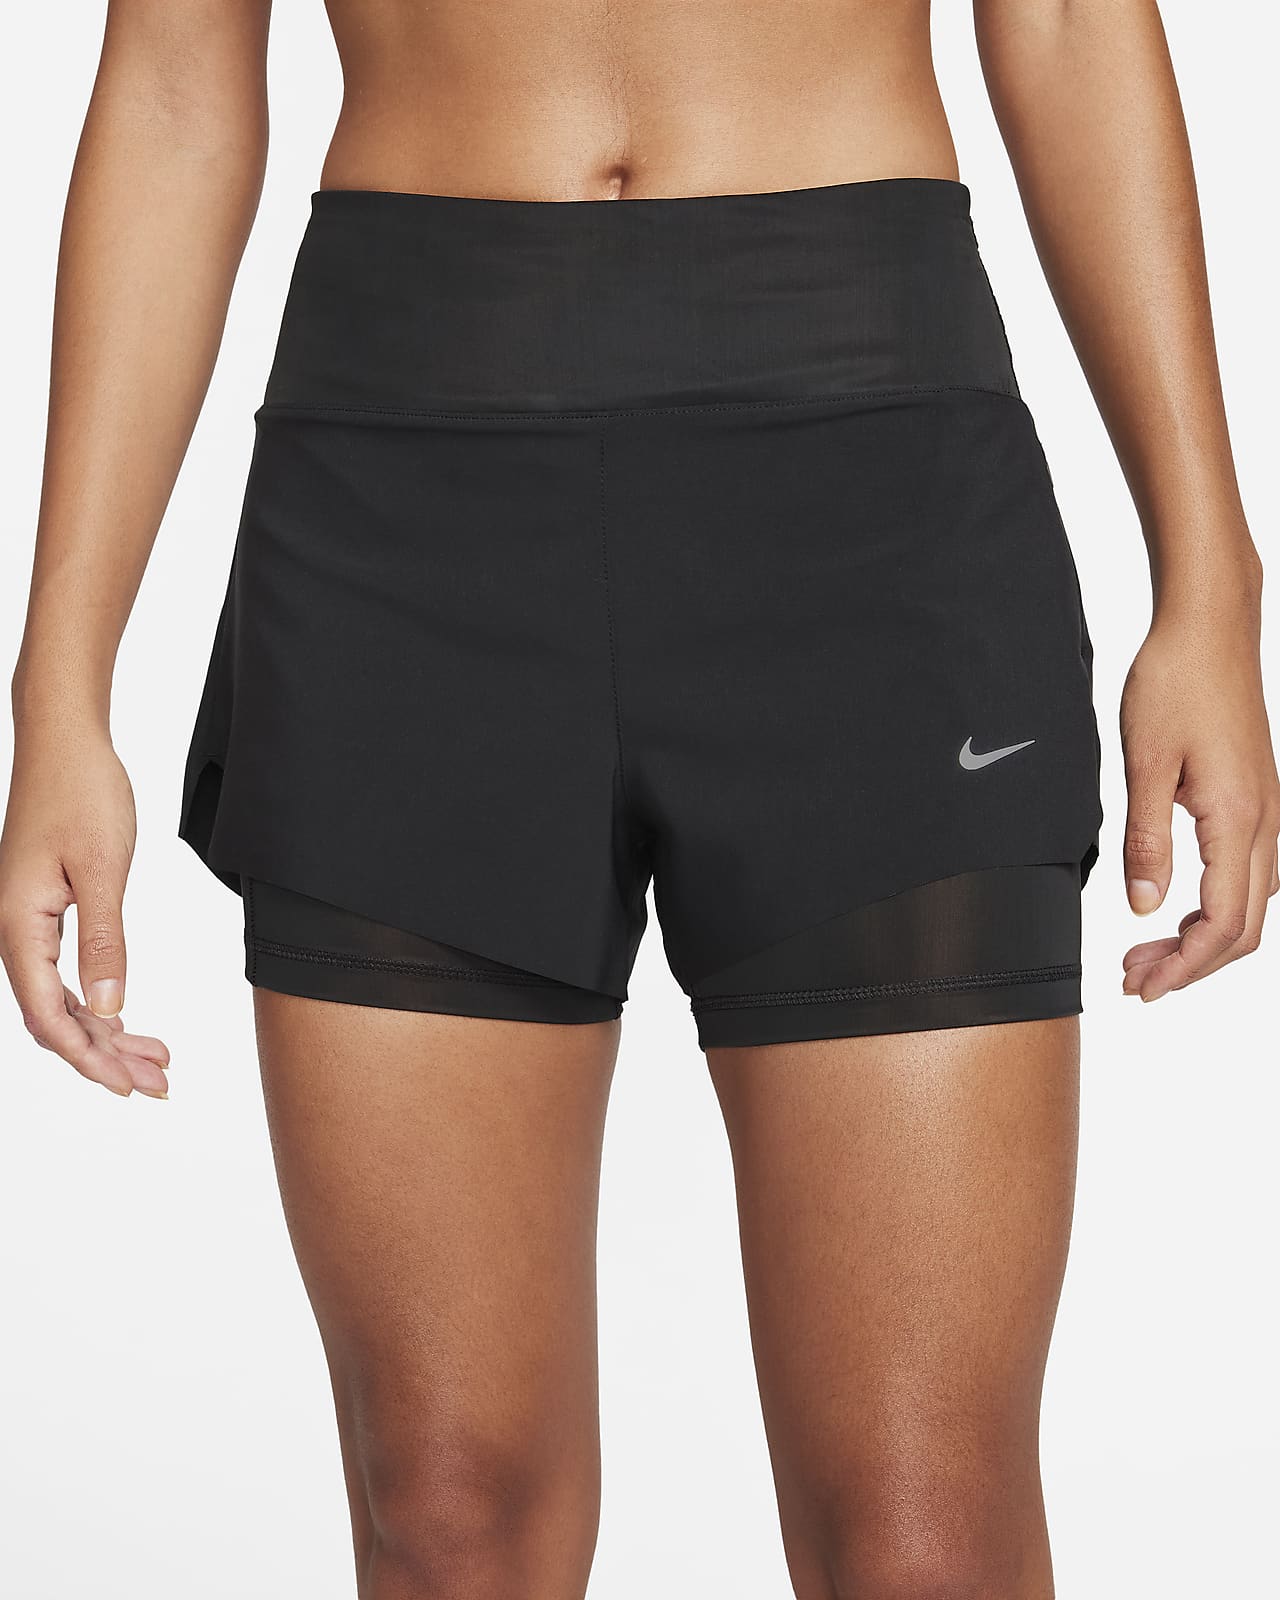 Nike Dri-FIT Swift Women's Mid-Rise 3 2-in-1 Running Shorts with